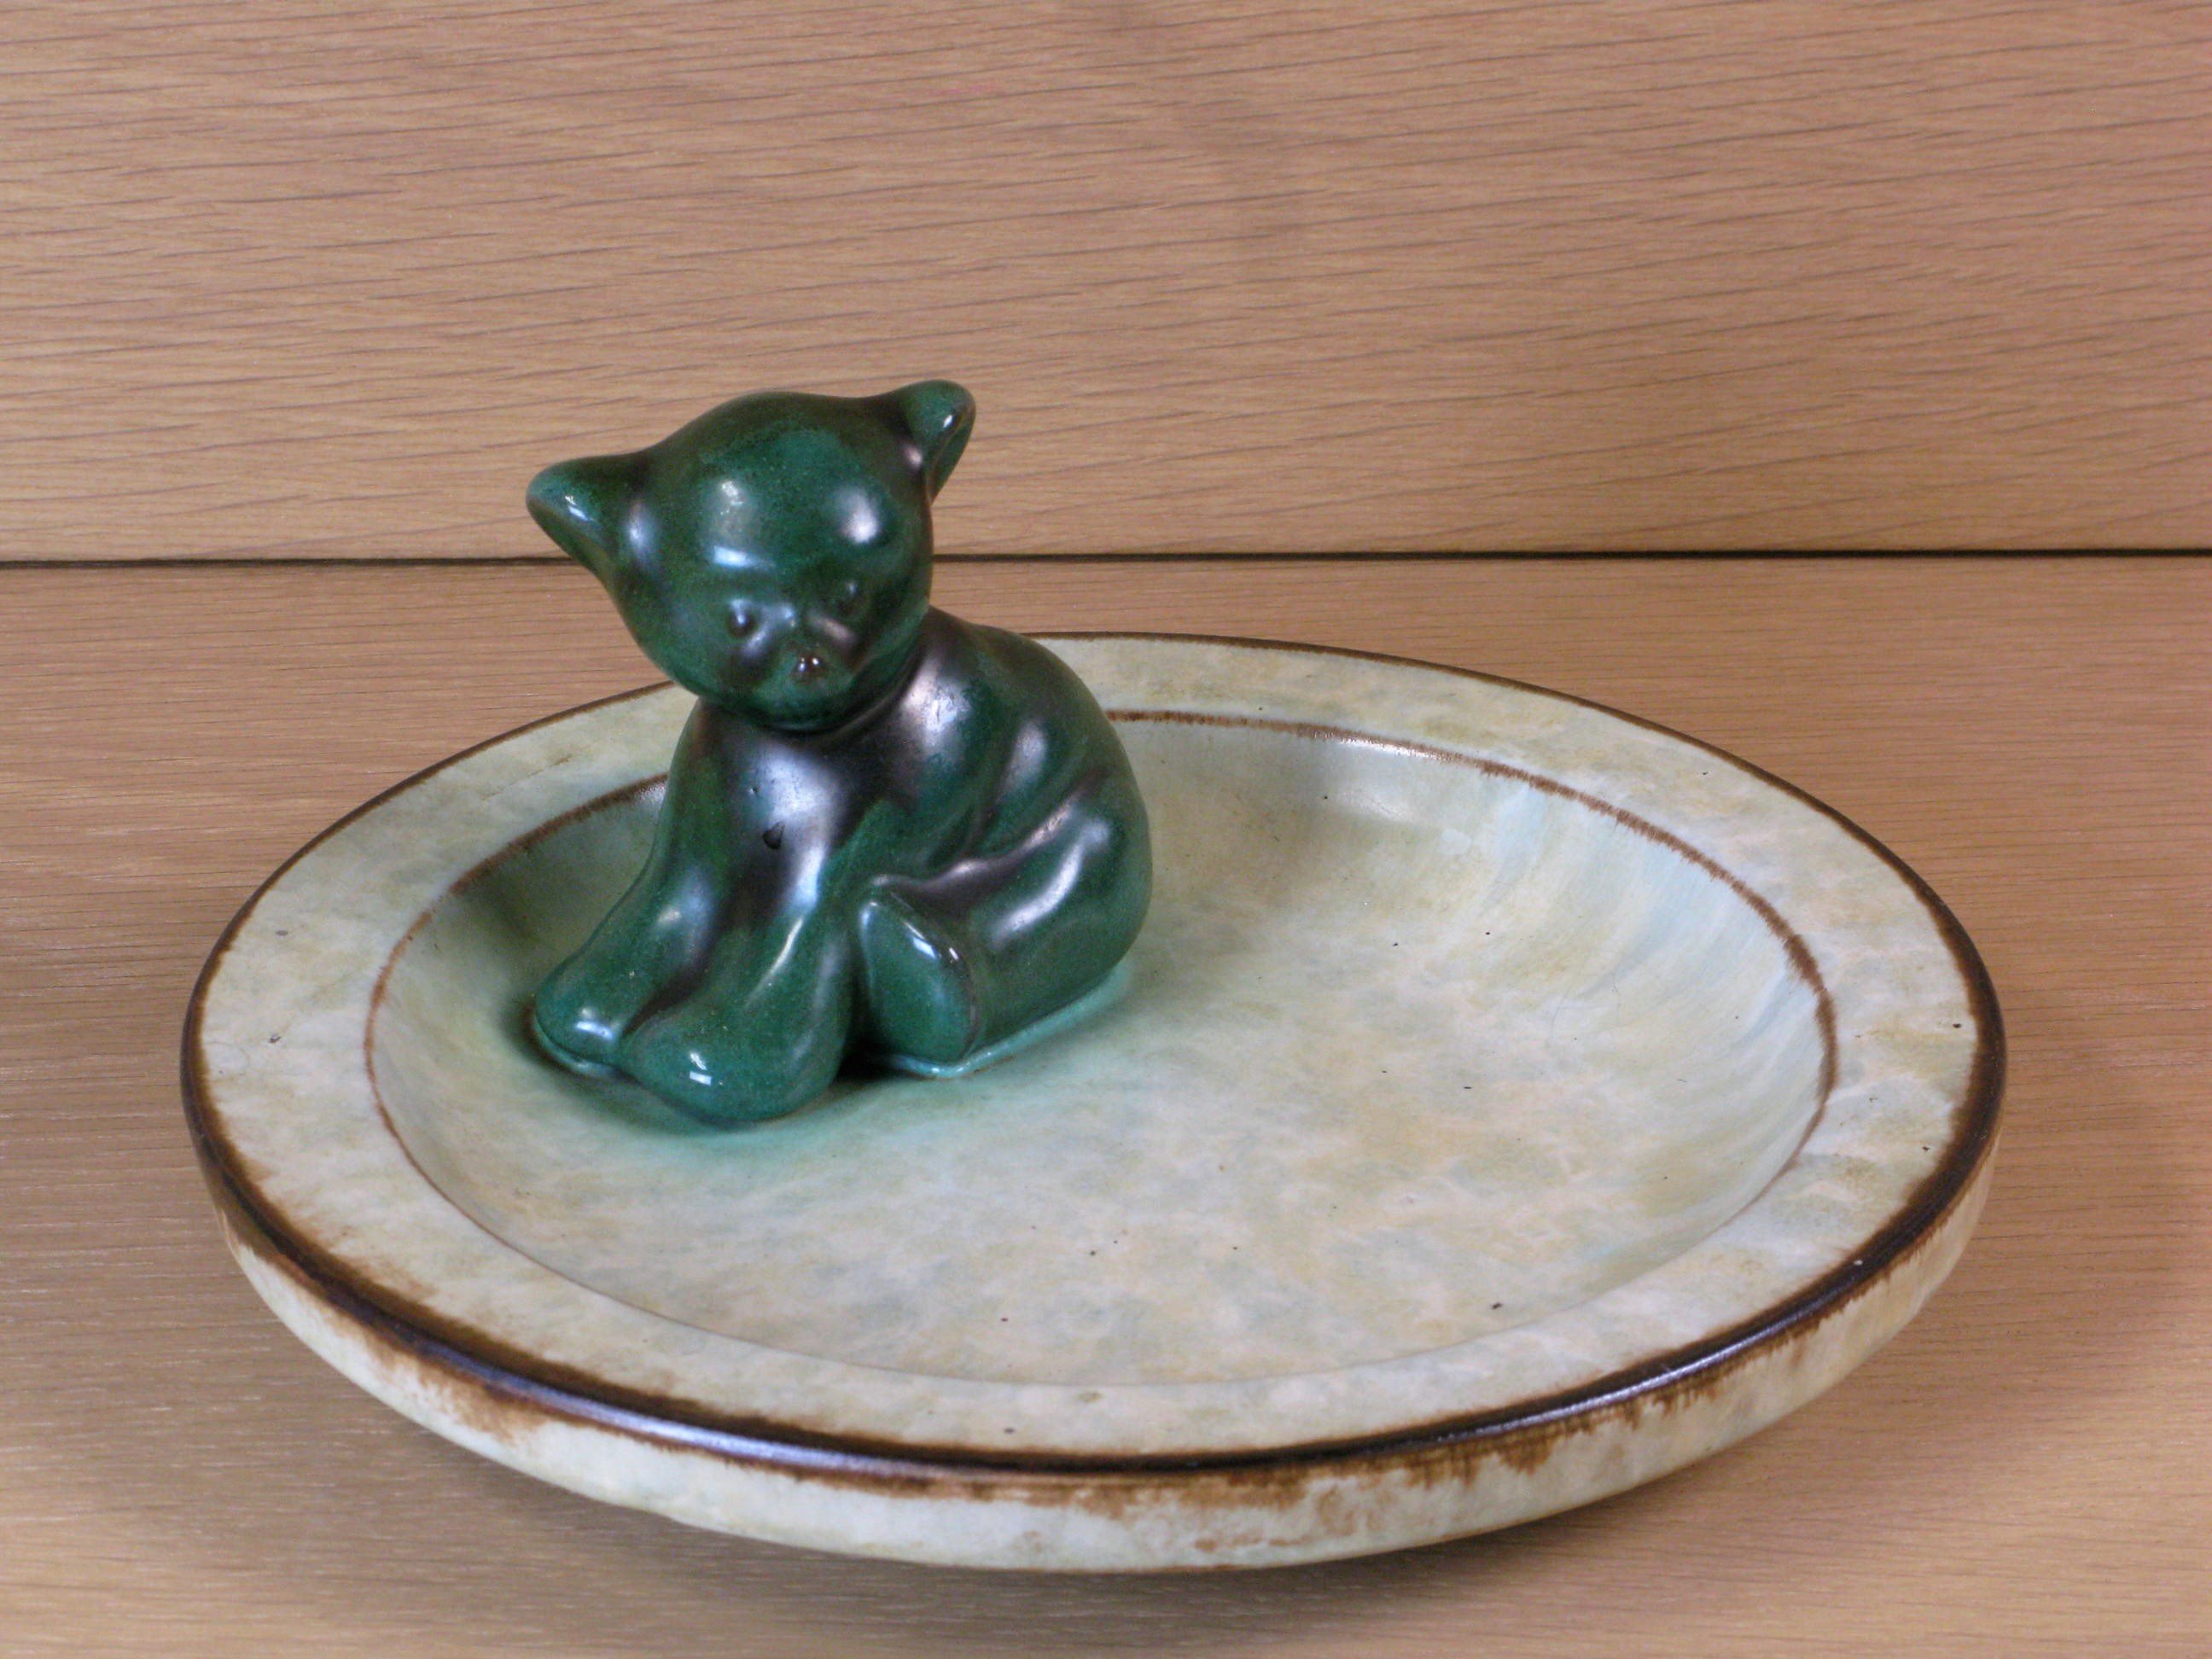 Sitting green bear in a bowl sold